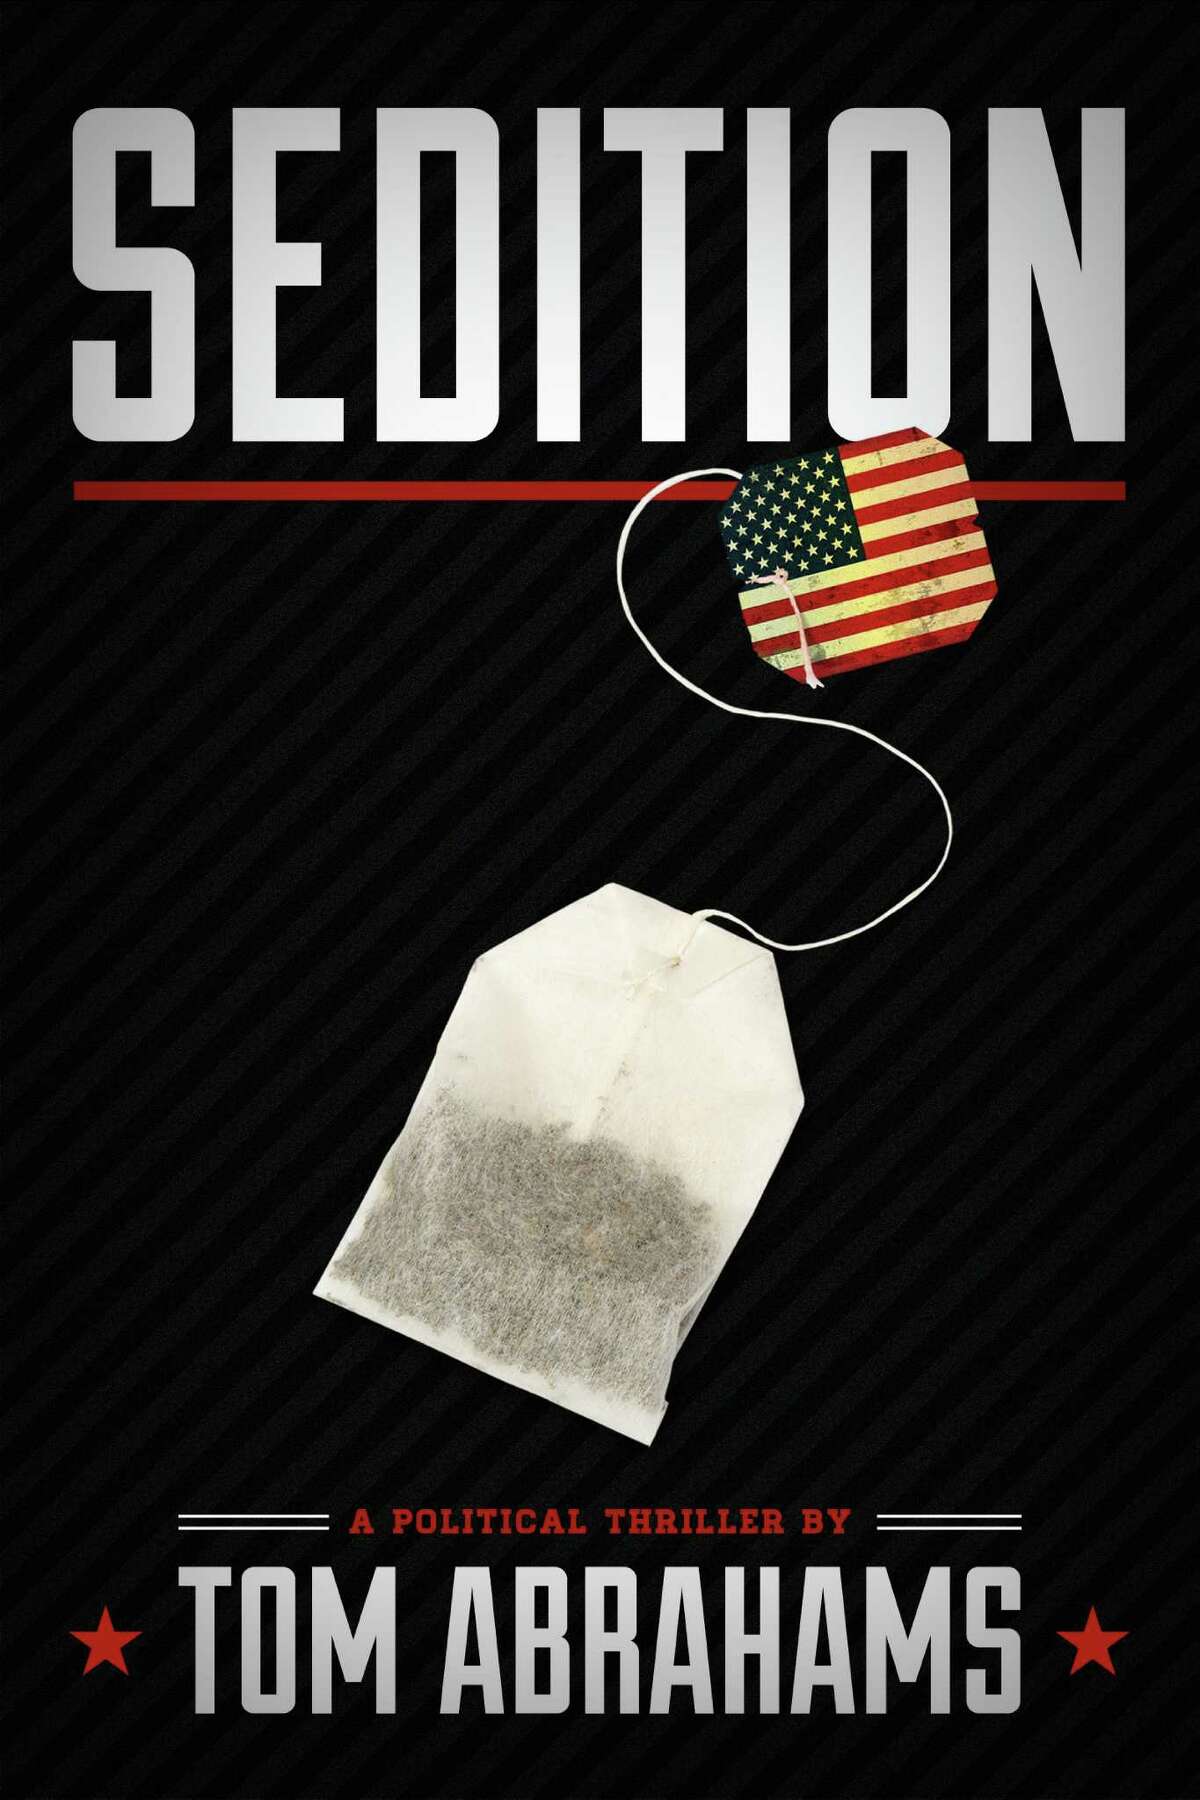 Channel 13 weekend anchor Tom Abrahams' first novel, "Sedition," comes out in paperback on Jan. 28.